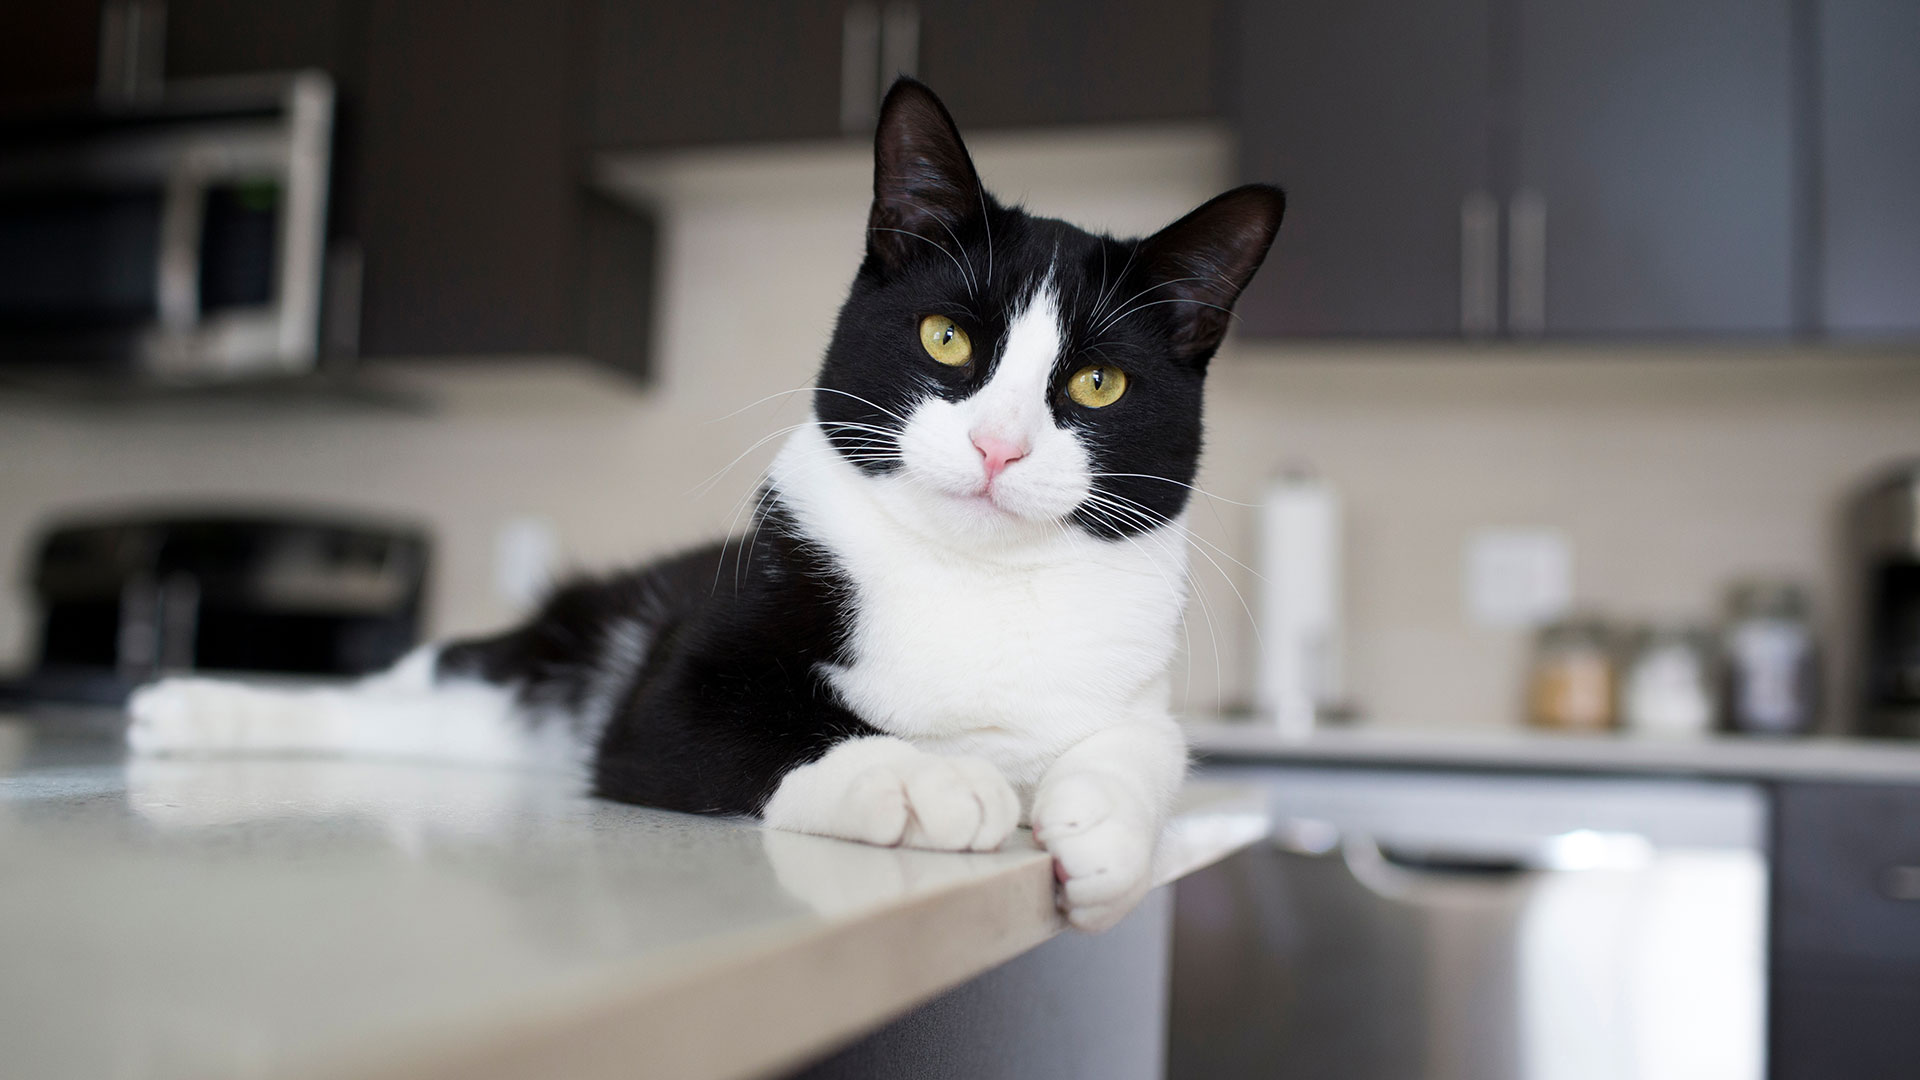 Tuxedo black and white domestic cat laying on kitchen countertop